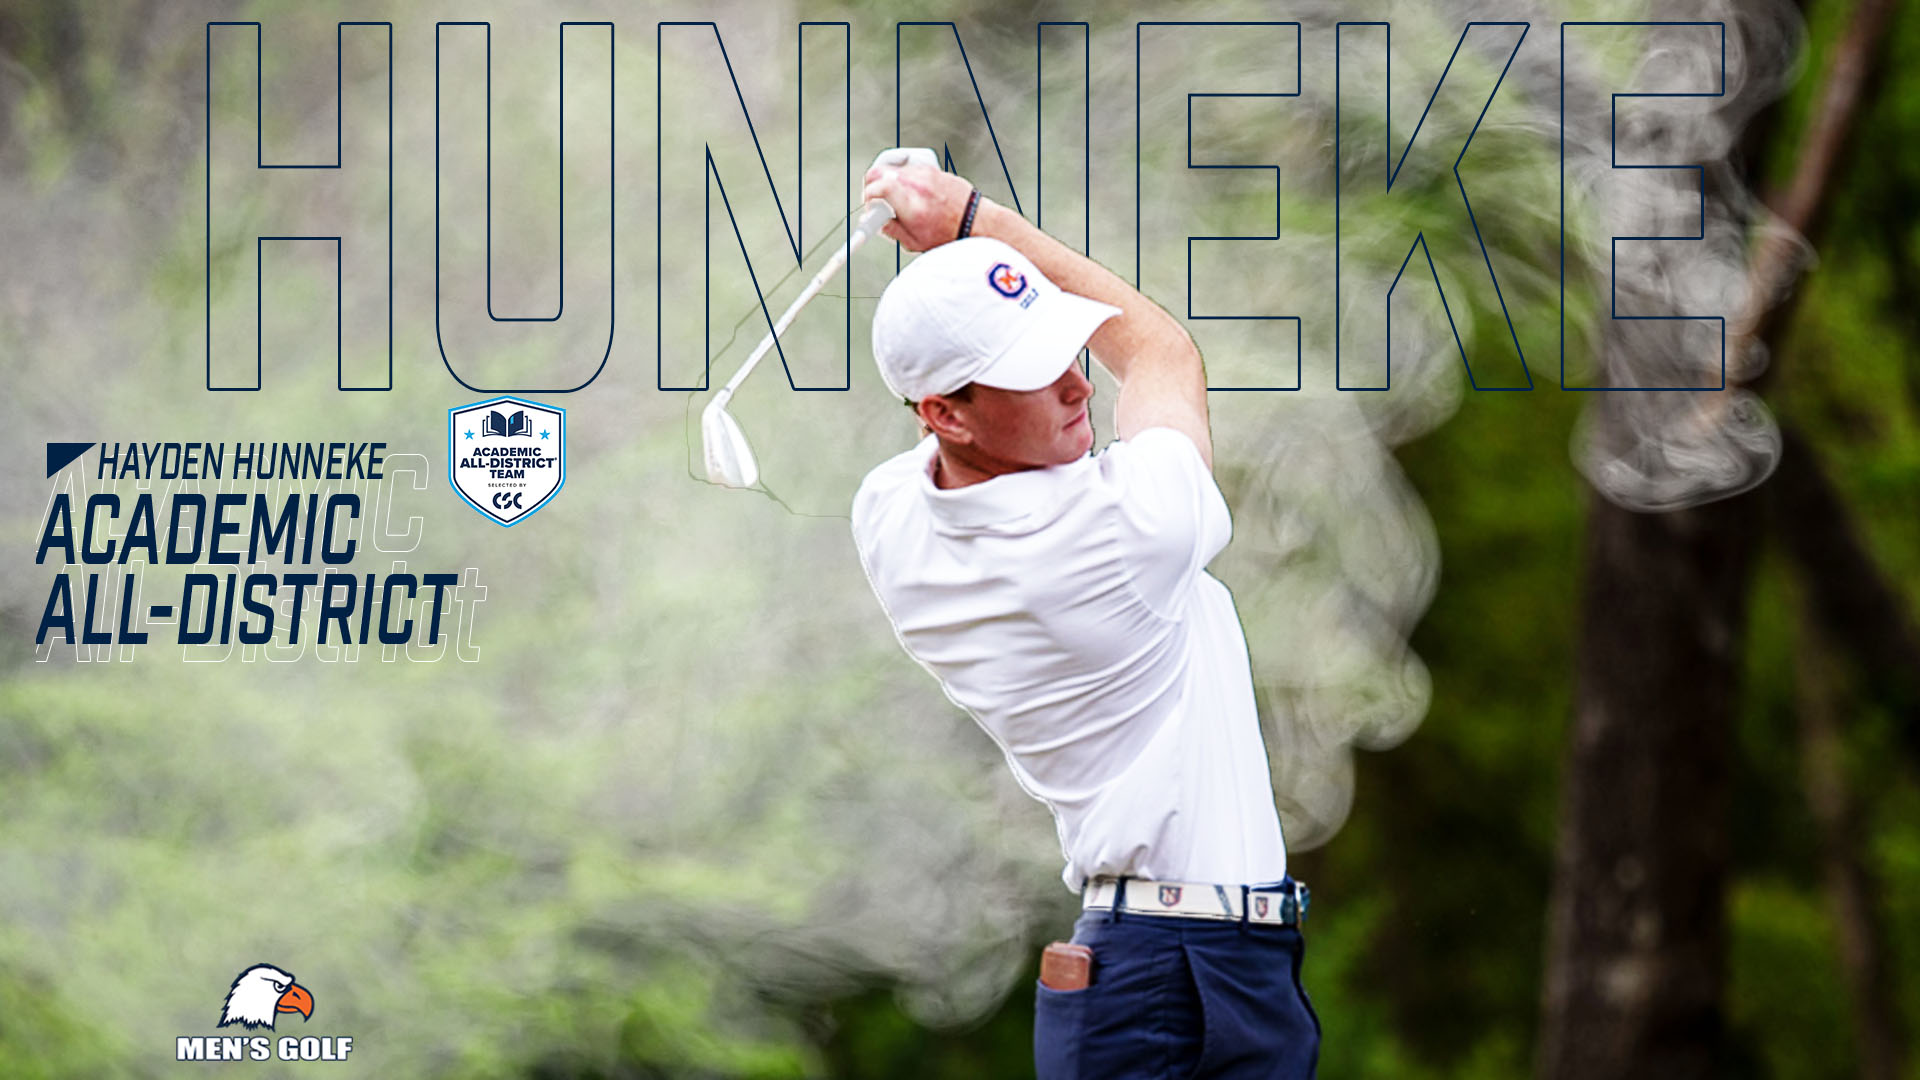 Hunneke snags CSC Academic All-District At-Large honors